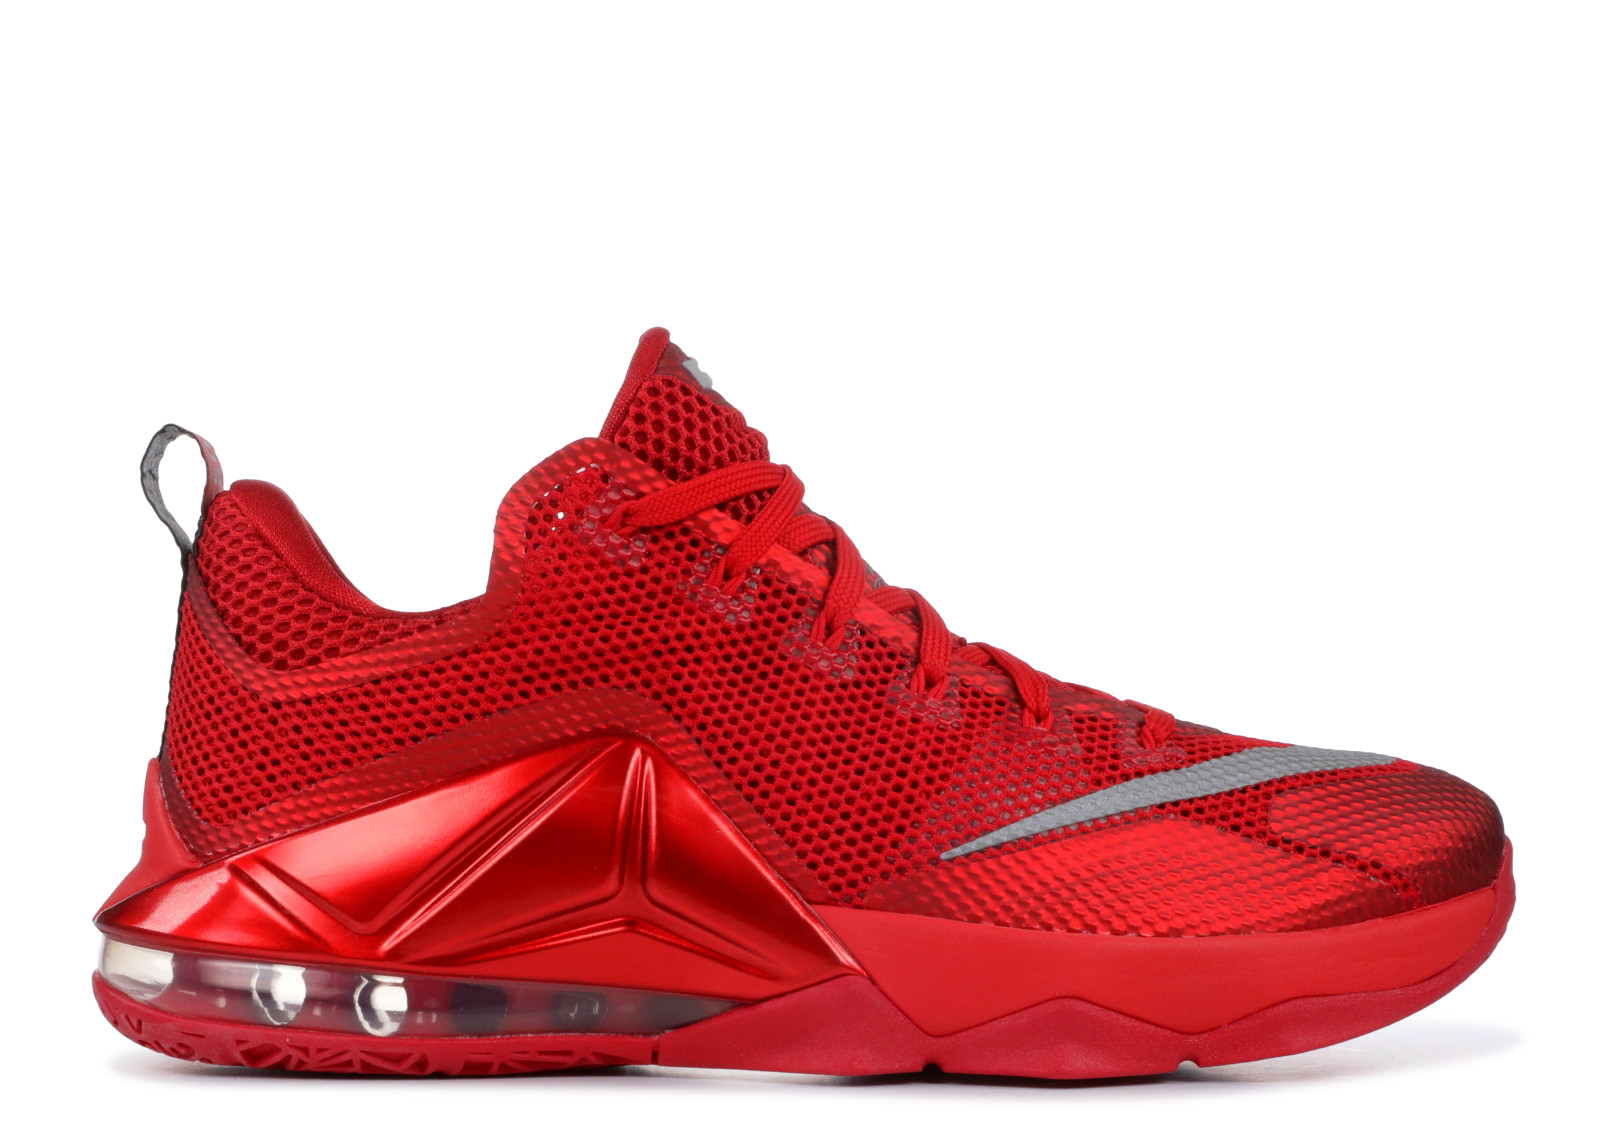 Nike Men's Lebron XII Low Unvrsty Rd/Rflct Slvr/Gym Rd/B Basketball Shoes - image 2 of 3